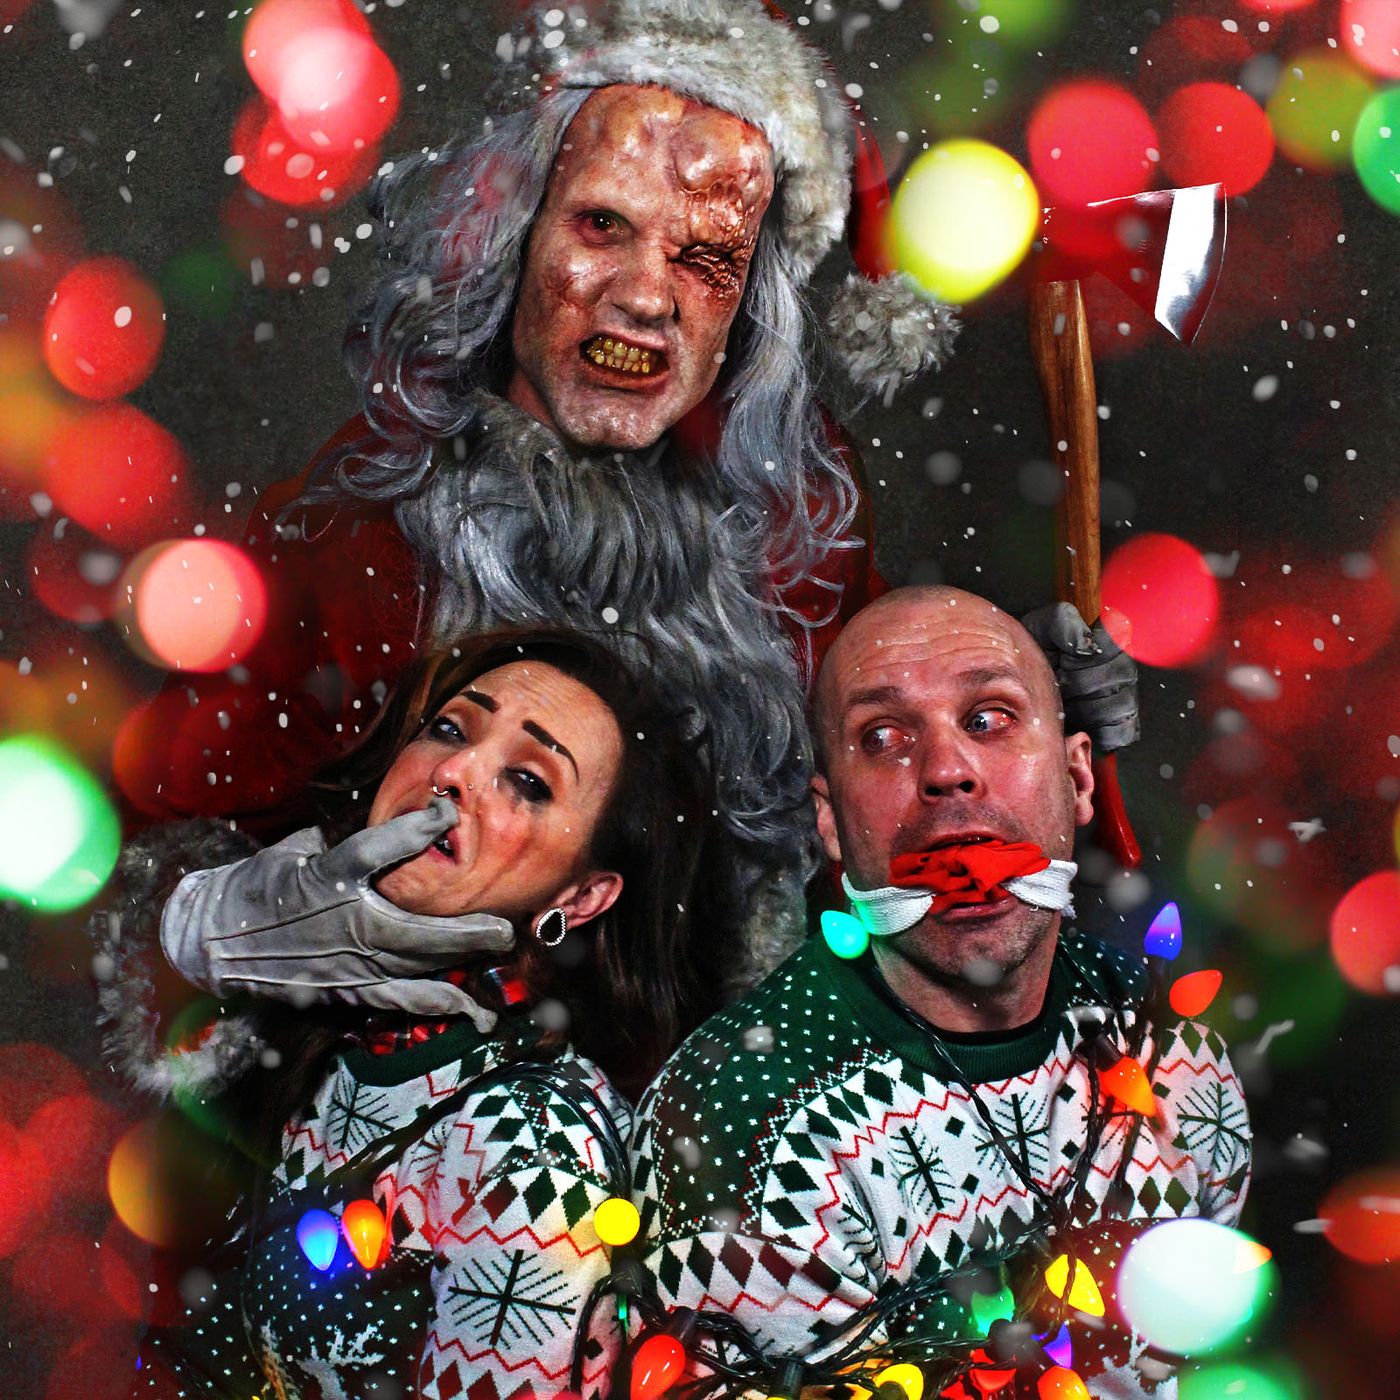 The Definitive List of Christmas Horror Films to Watch